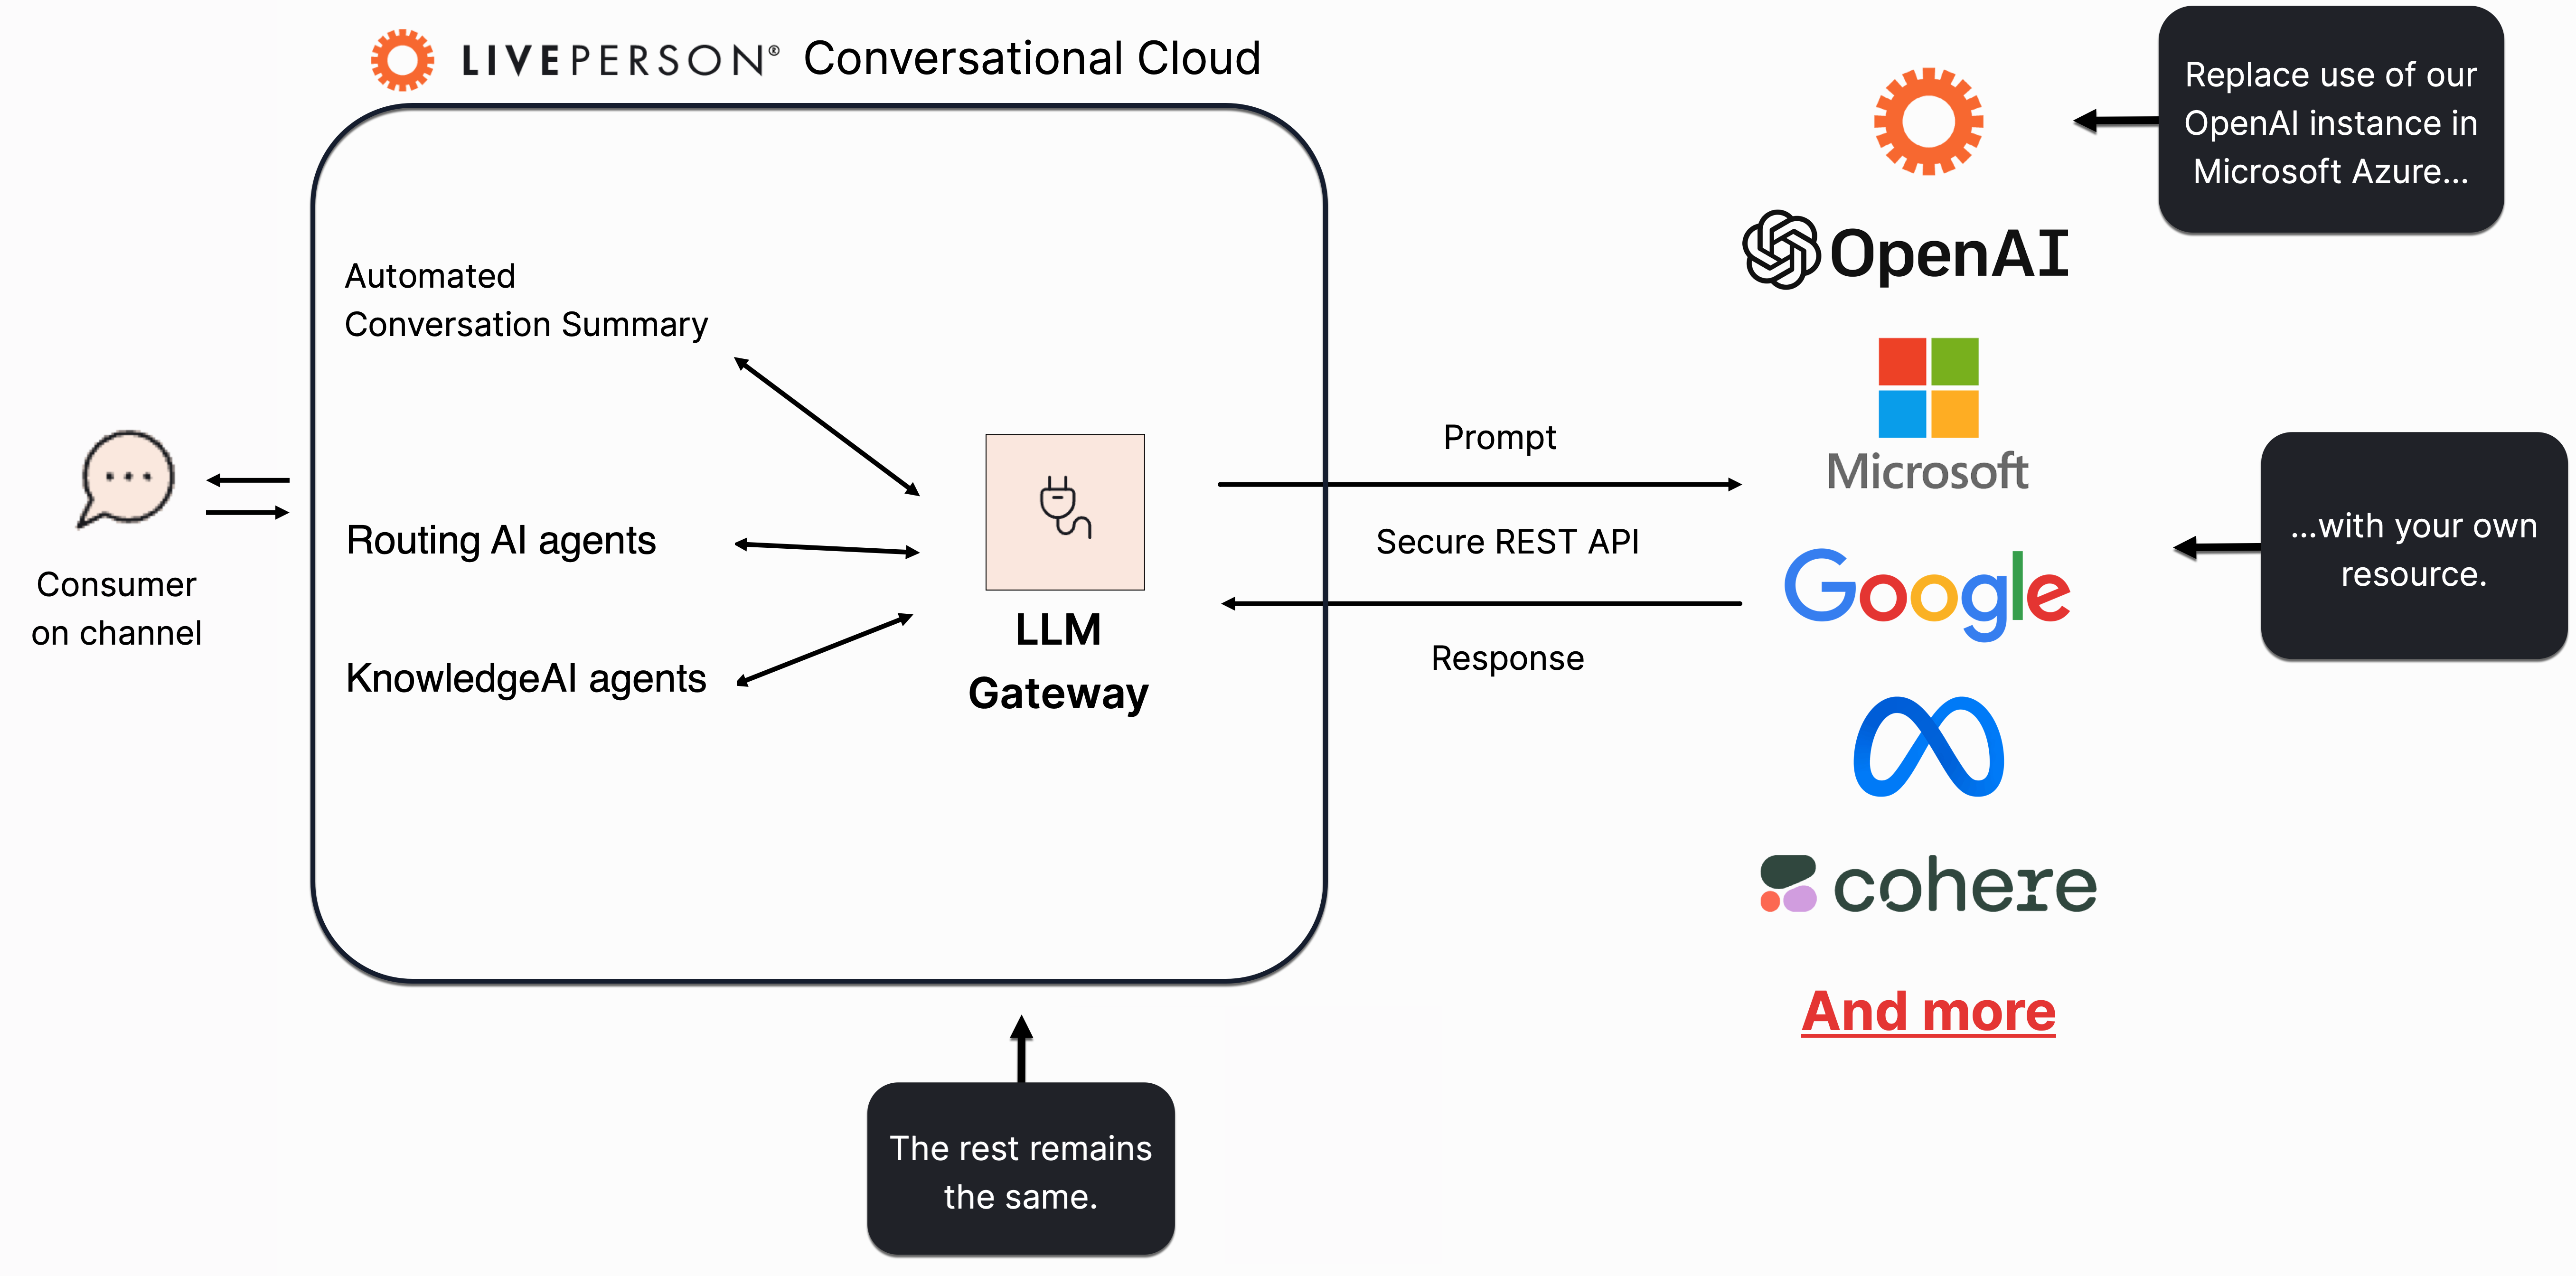 A diagram illustrating how the brand can use their own LLM and the erst of the Conversational AI solution remains the same; just replace our LLM with your own resource